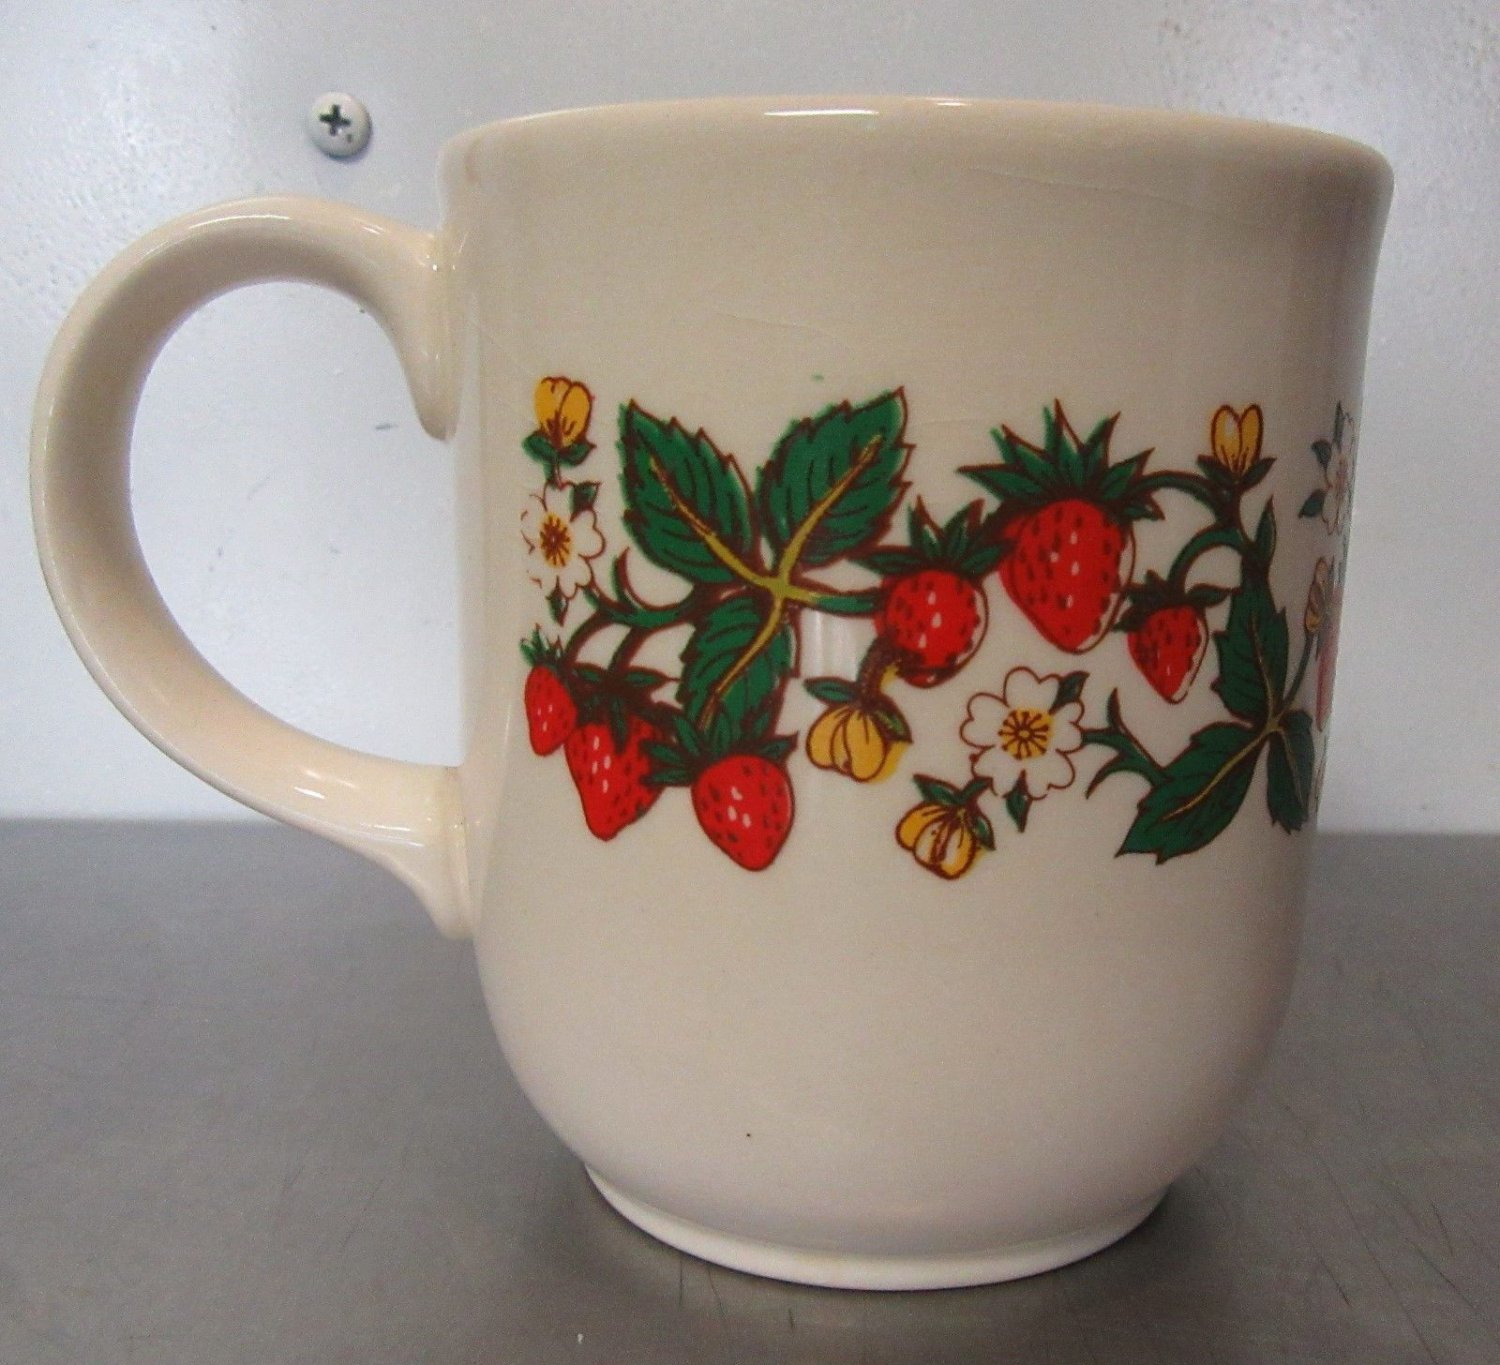 Mount Clemens Strawberries Coffee Teacup Cocoa Cup Mug Vintage Usa